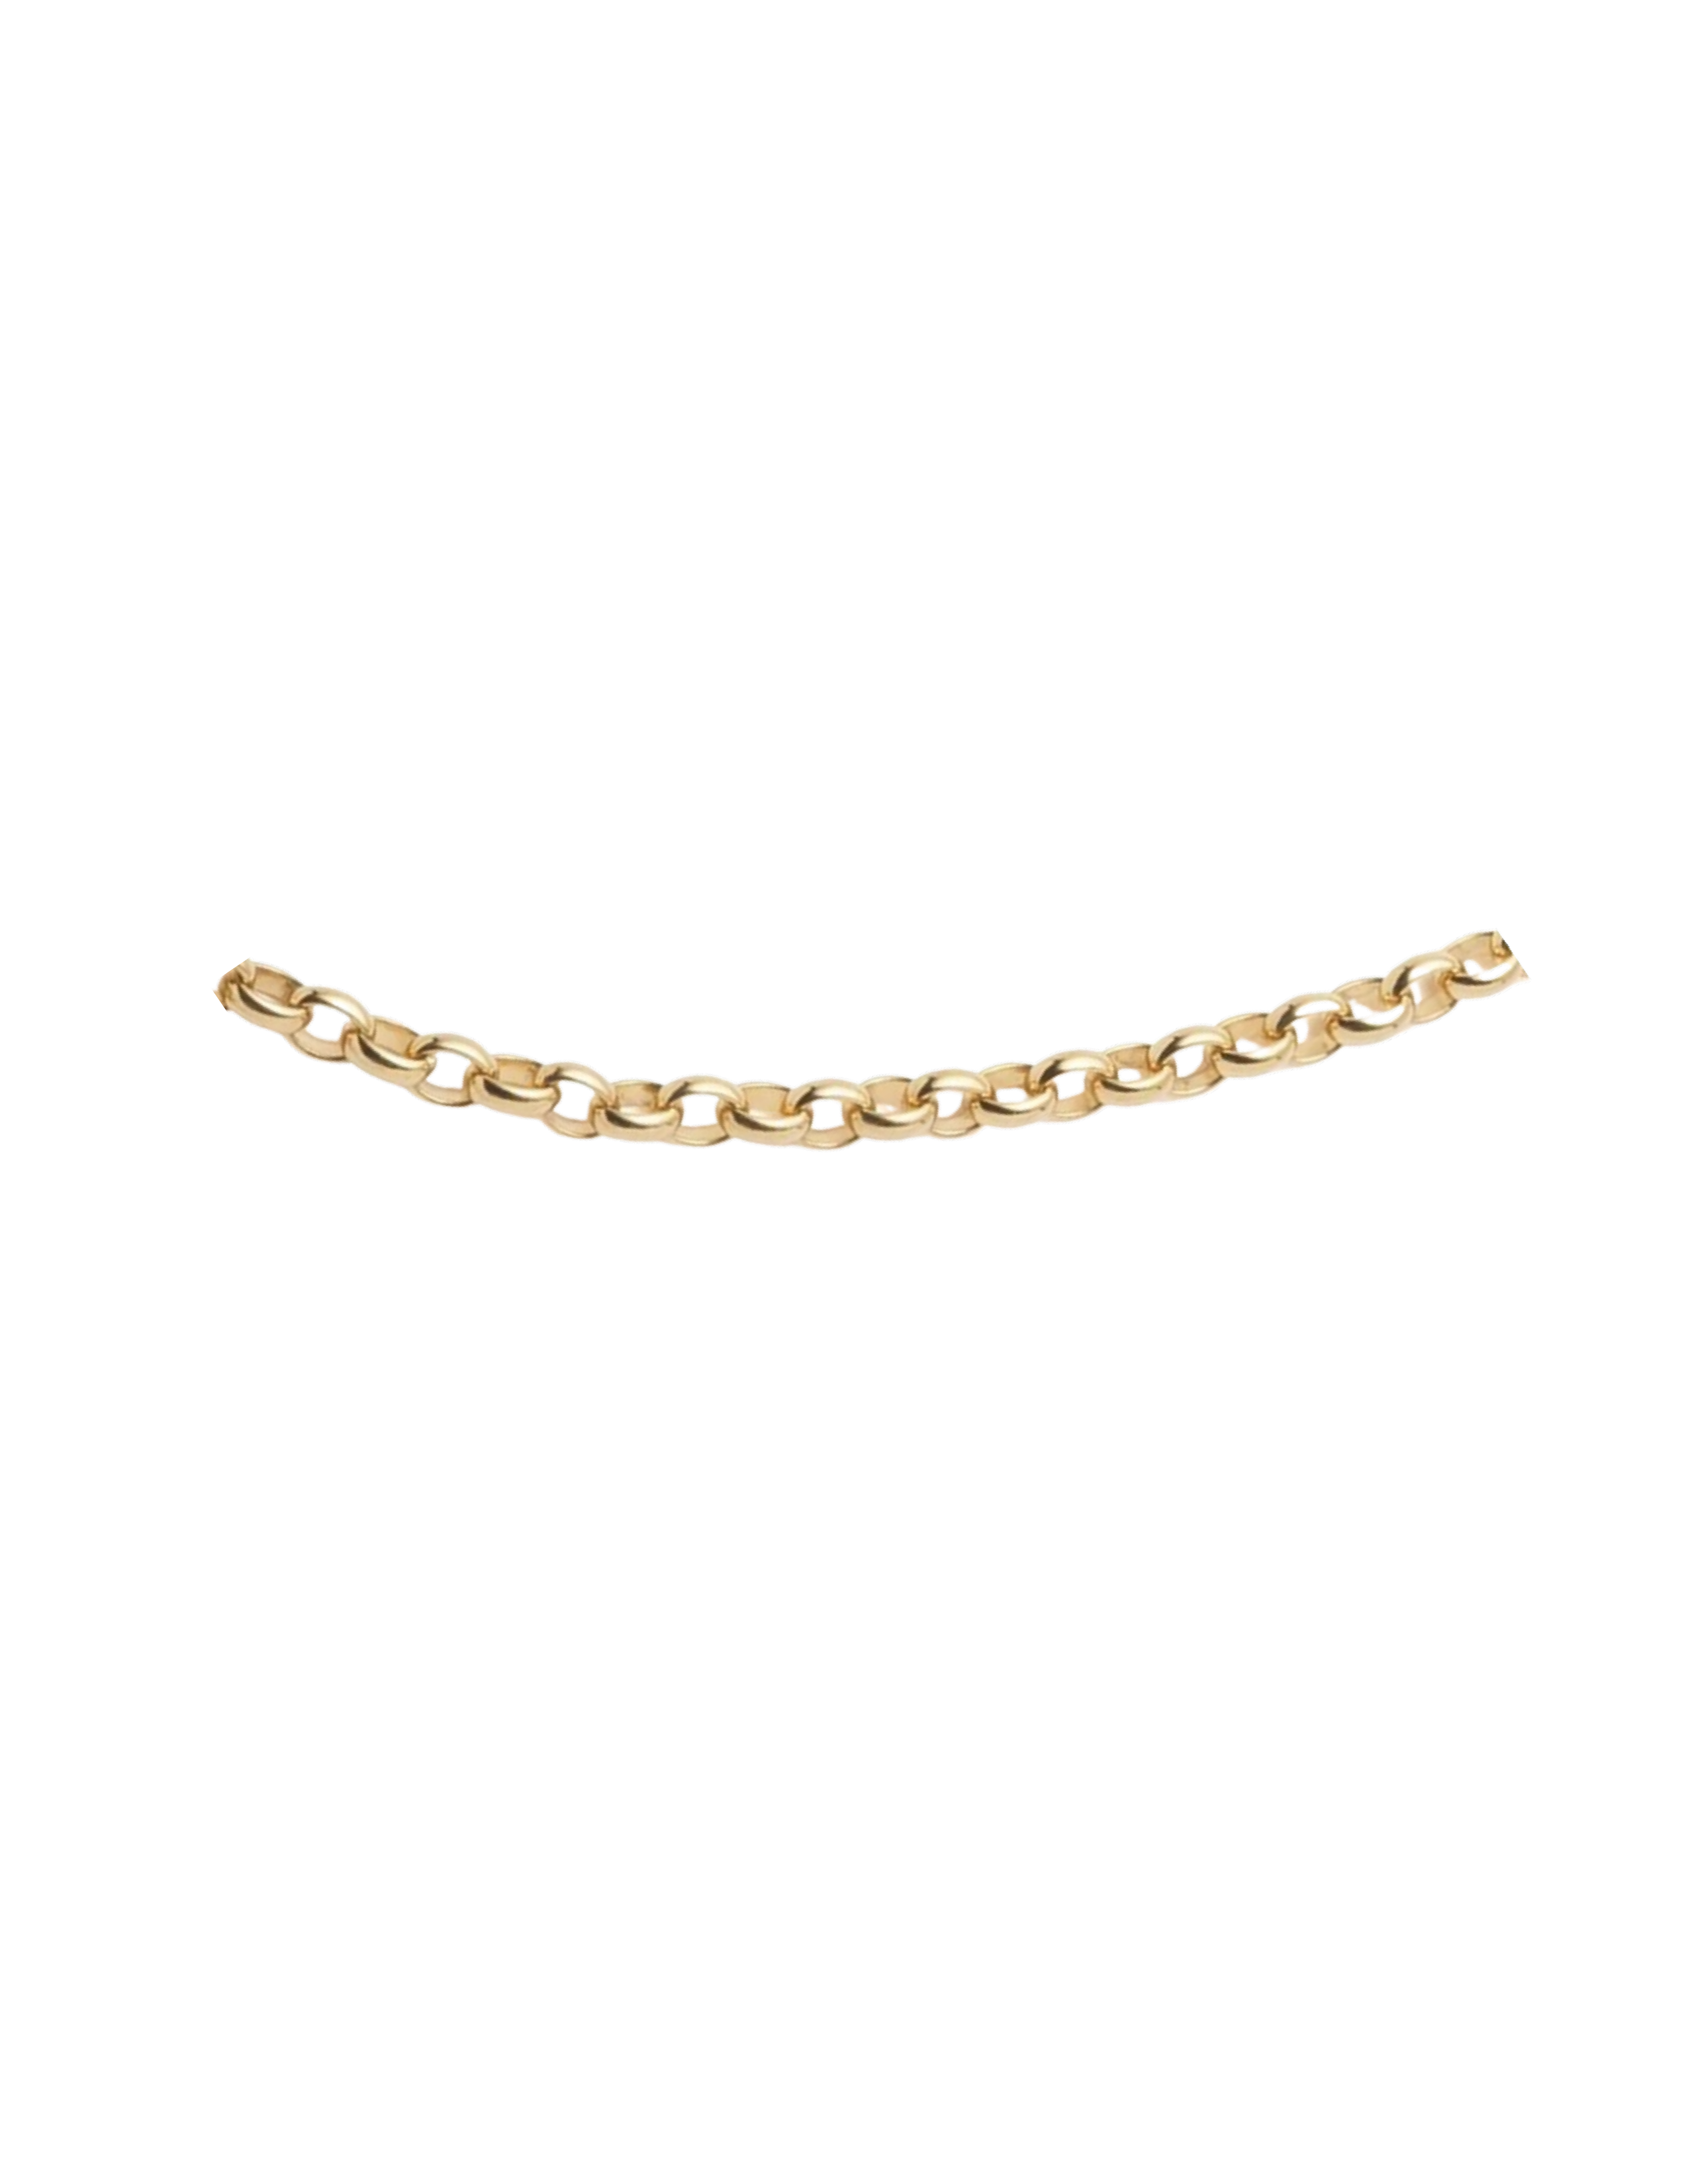 THE BLING KING 10mm Giant Gold Gypsy Link Belcher Bracelet with Stones, 18K  Real Gold Plated Jewellery, Uniquely Patterned Alternating Links (Length:  8-9 Inches, Weight: 60 grams) : Amazon.co.uk: Fashion